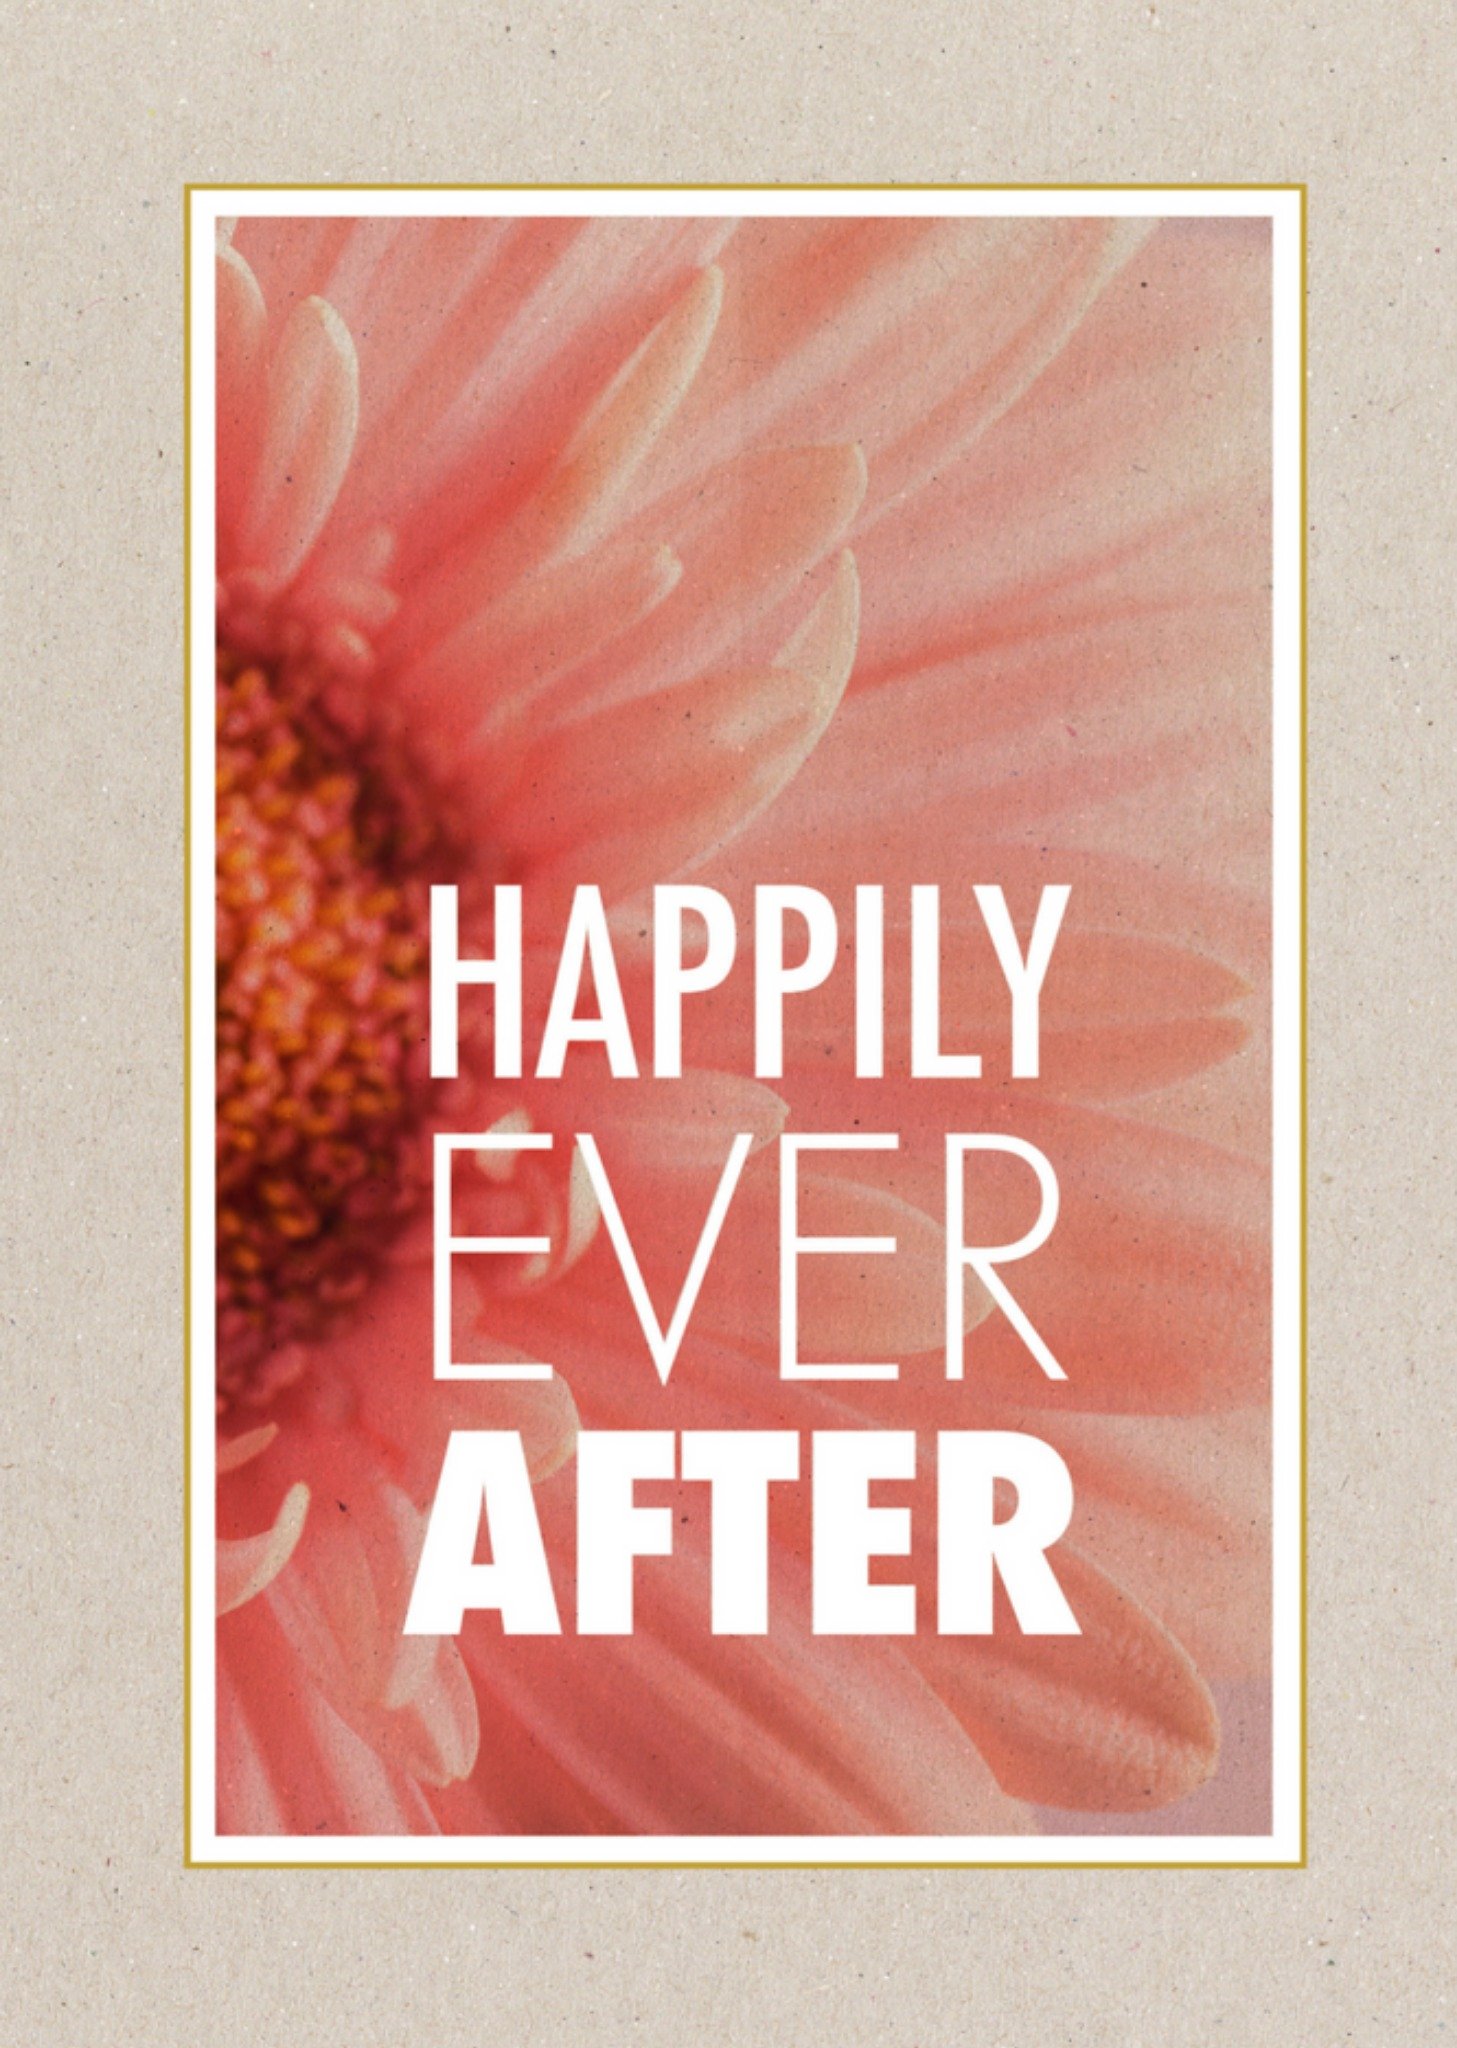 Paperclip - Getrouwd - Happily ever after